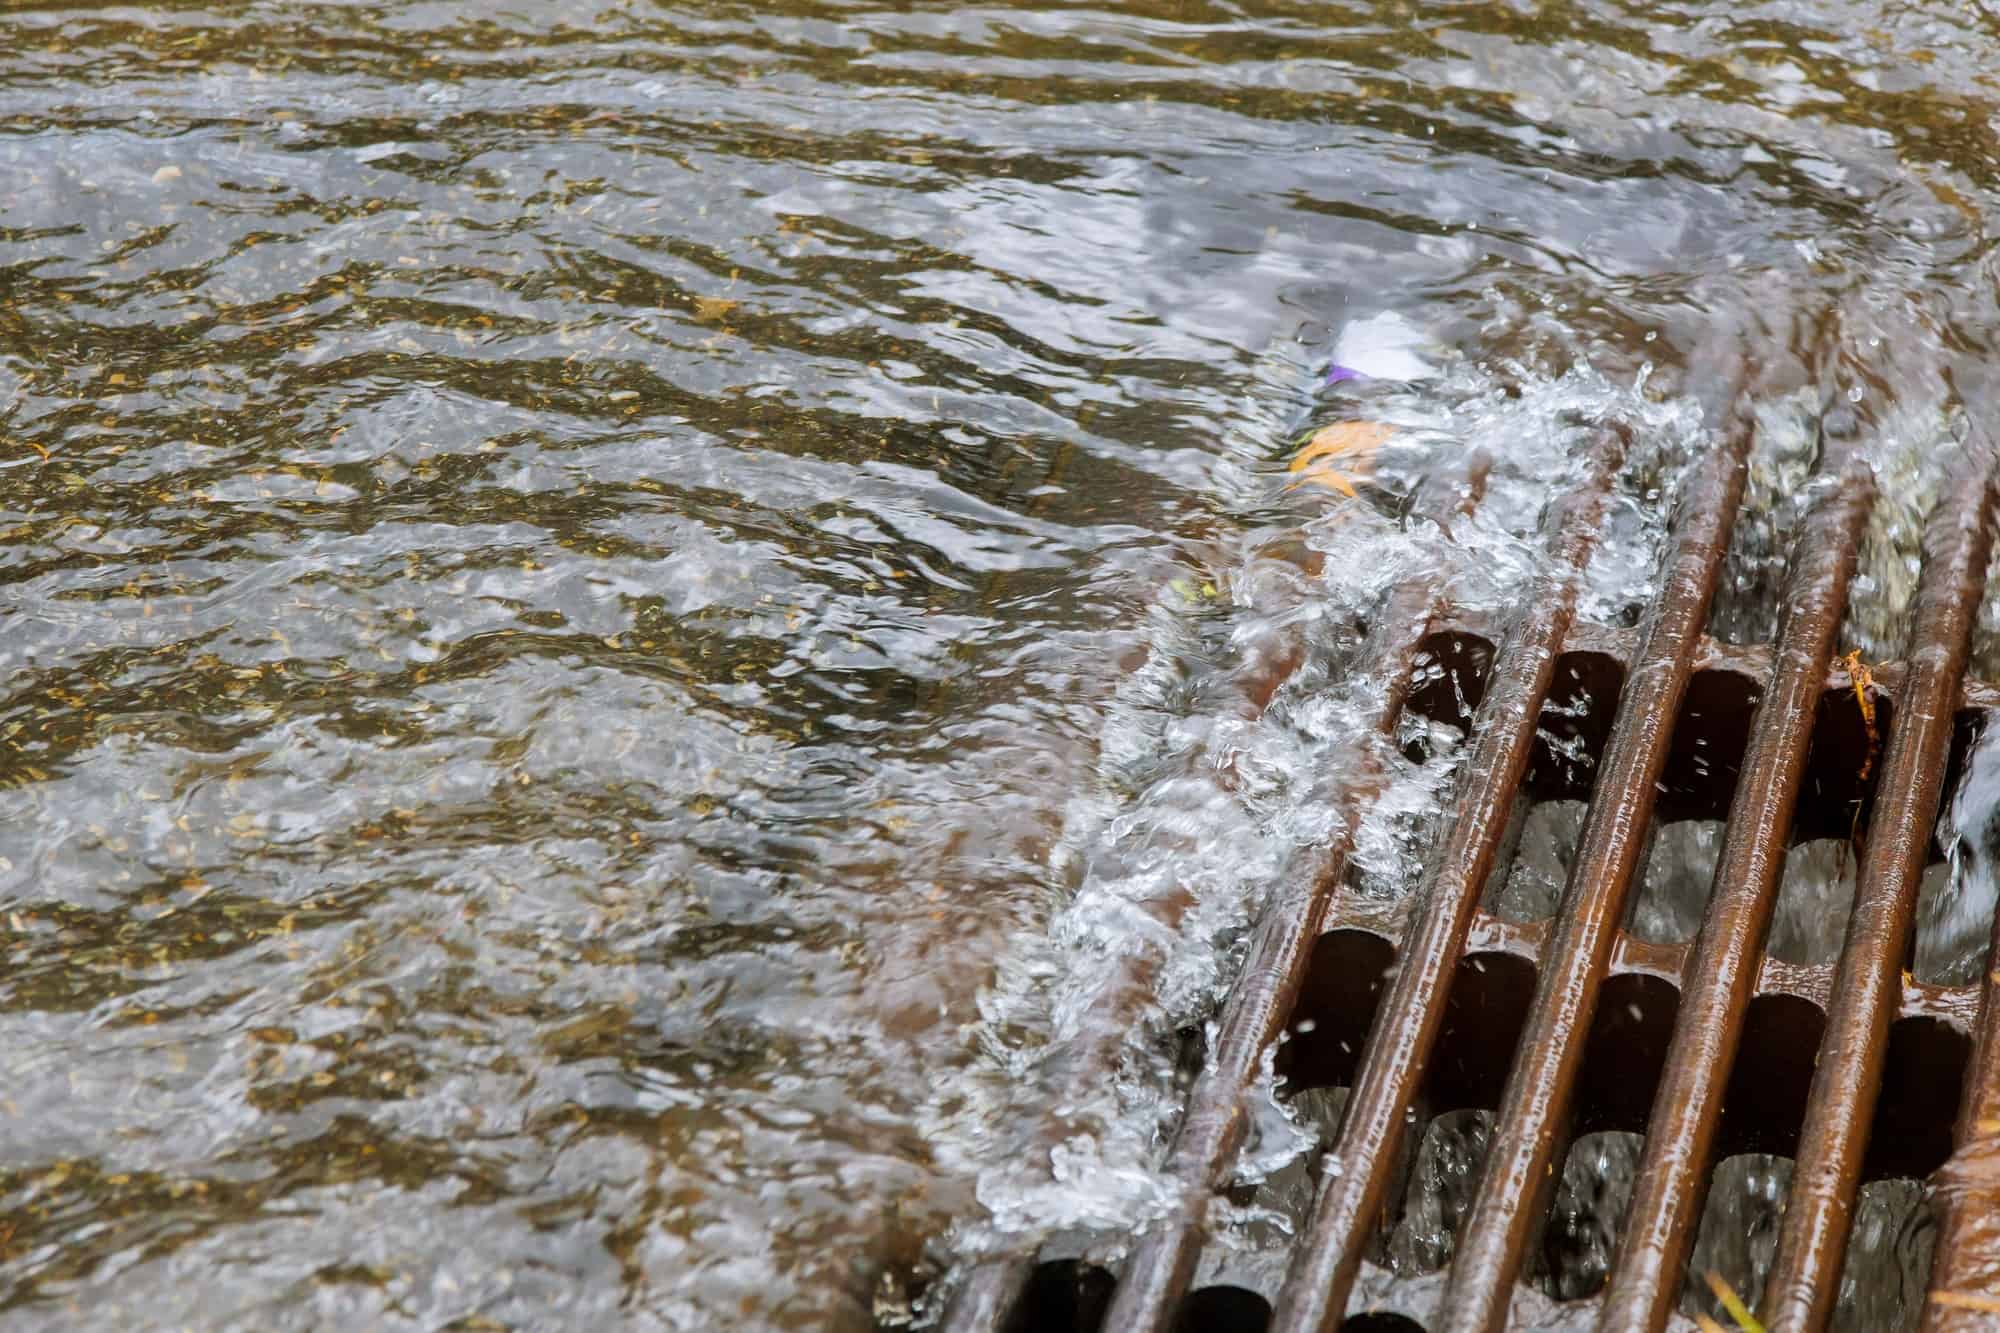 Very heavy rainfall in the water caused by heavy rain drains into the sewers immediately.